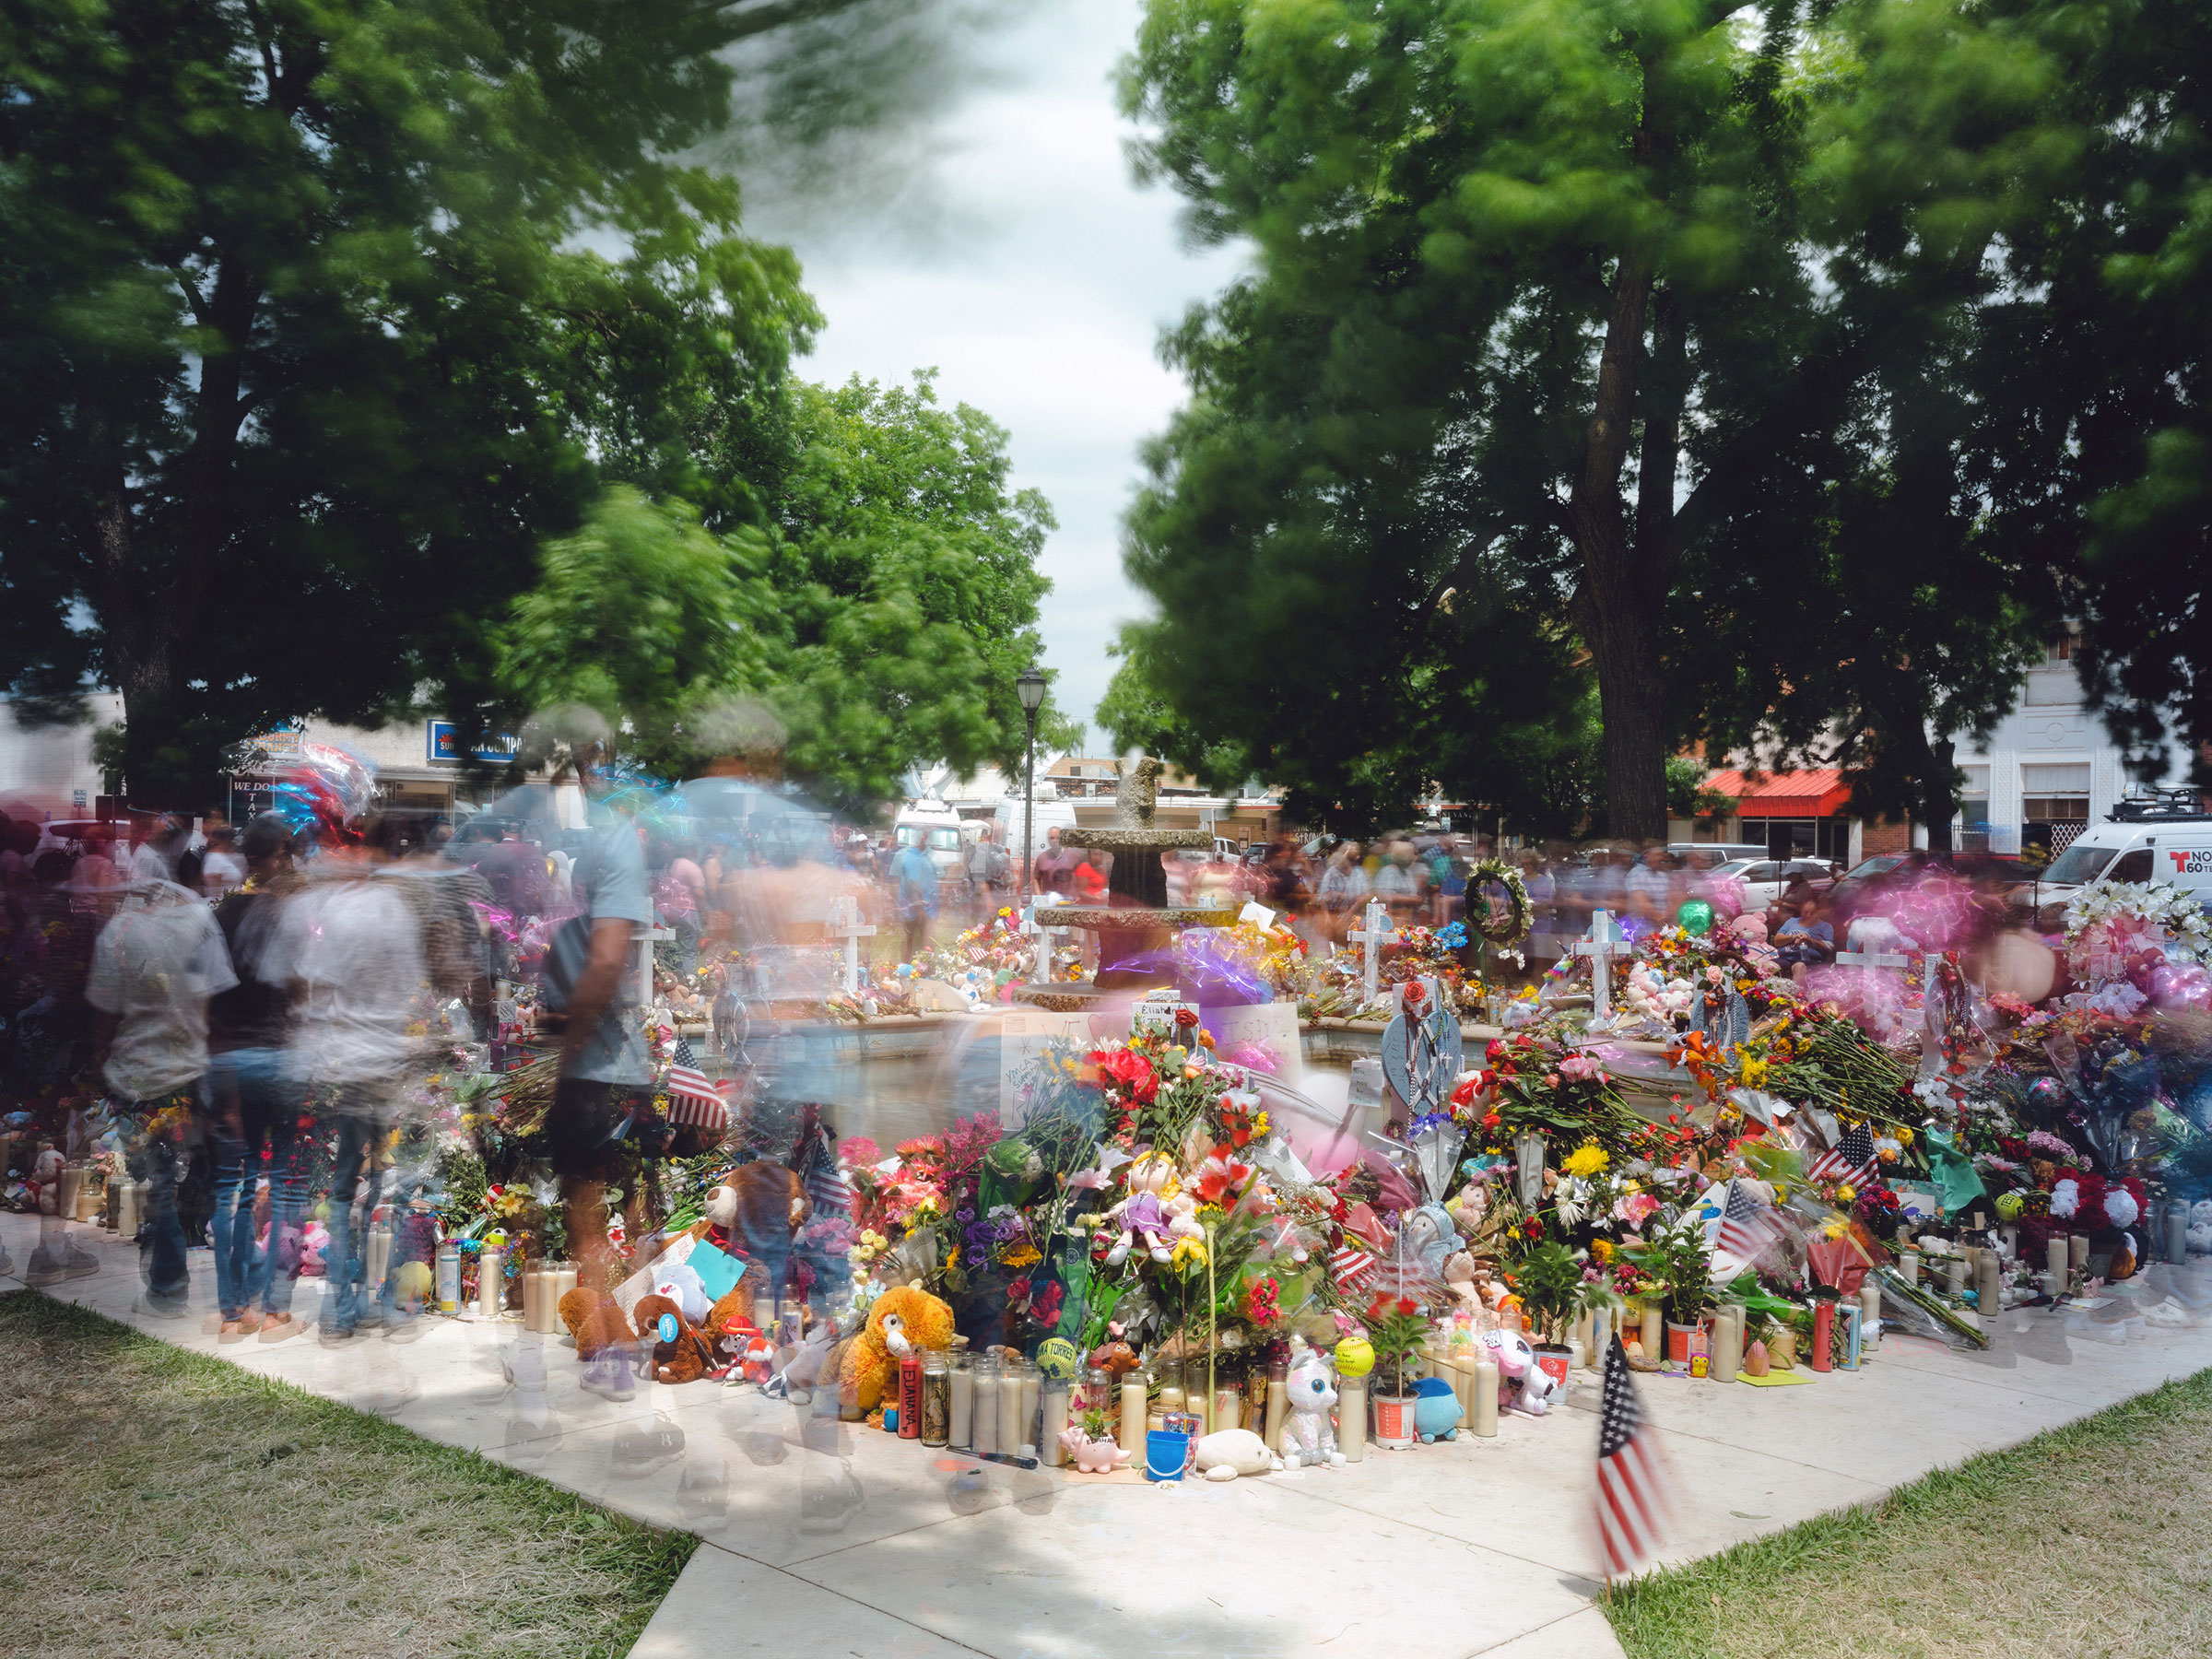 Mourners visit the memorial to the victims of the Uvalde school shooting at the town square in Uvalde, Texas, on May 30. In all, 21 people, 19 students and two teachers, were killed by a gunman at Robb Elementary School on May 24. (Christopher Lee—The New York Times/Redux)